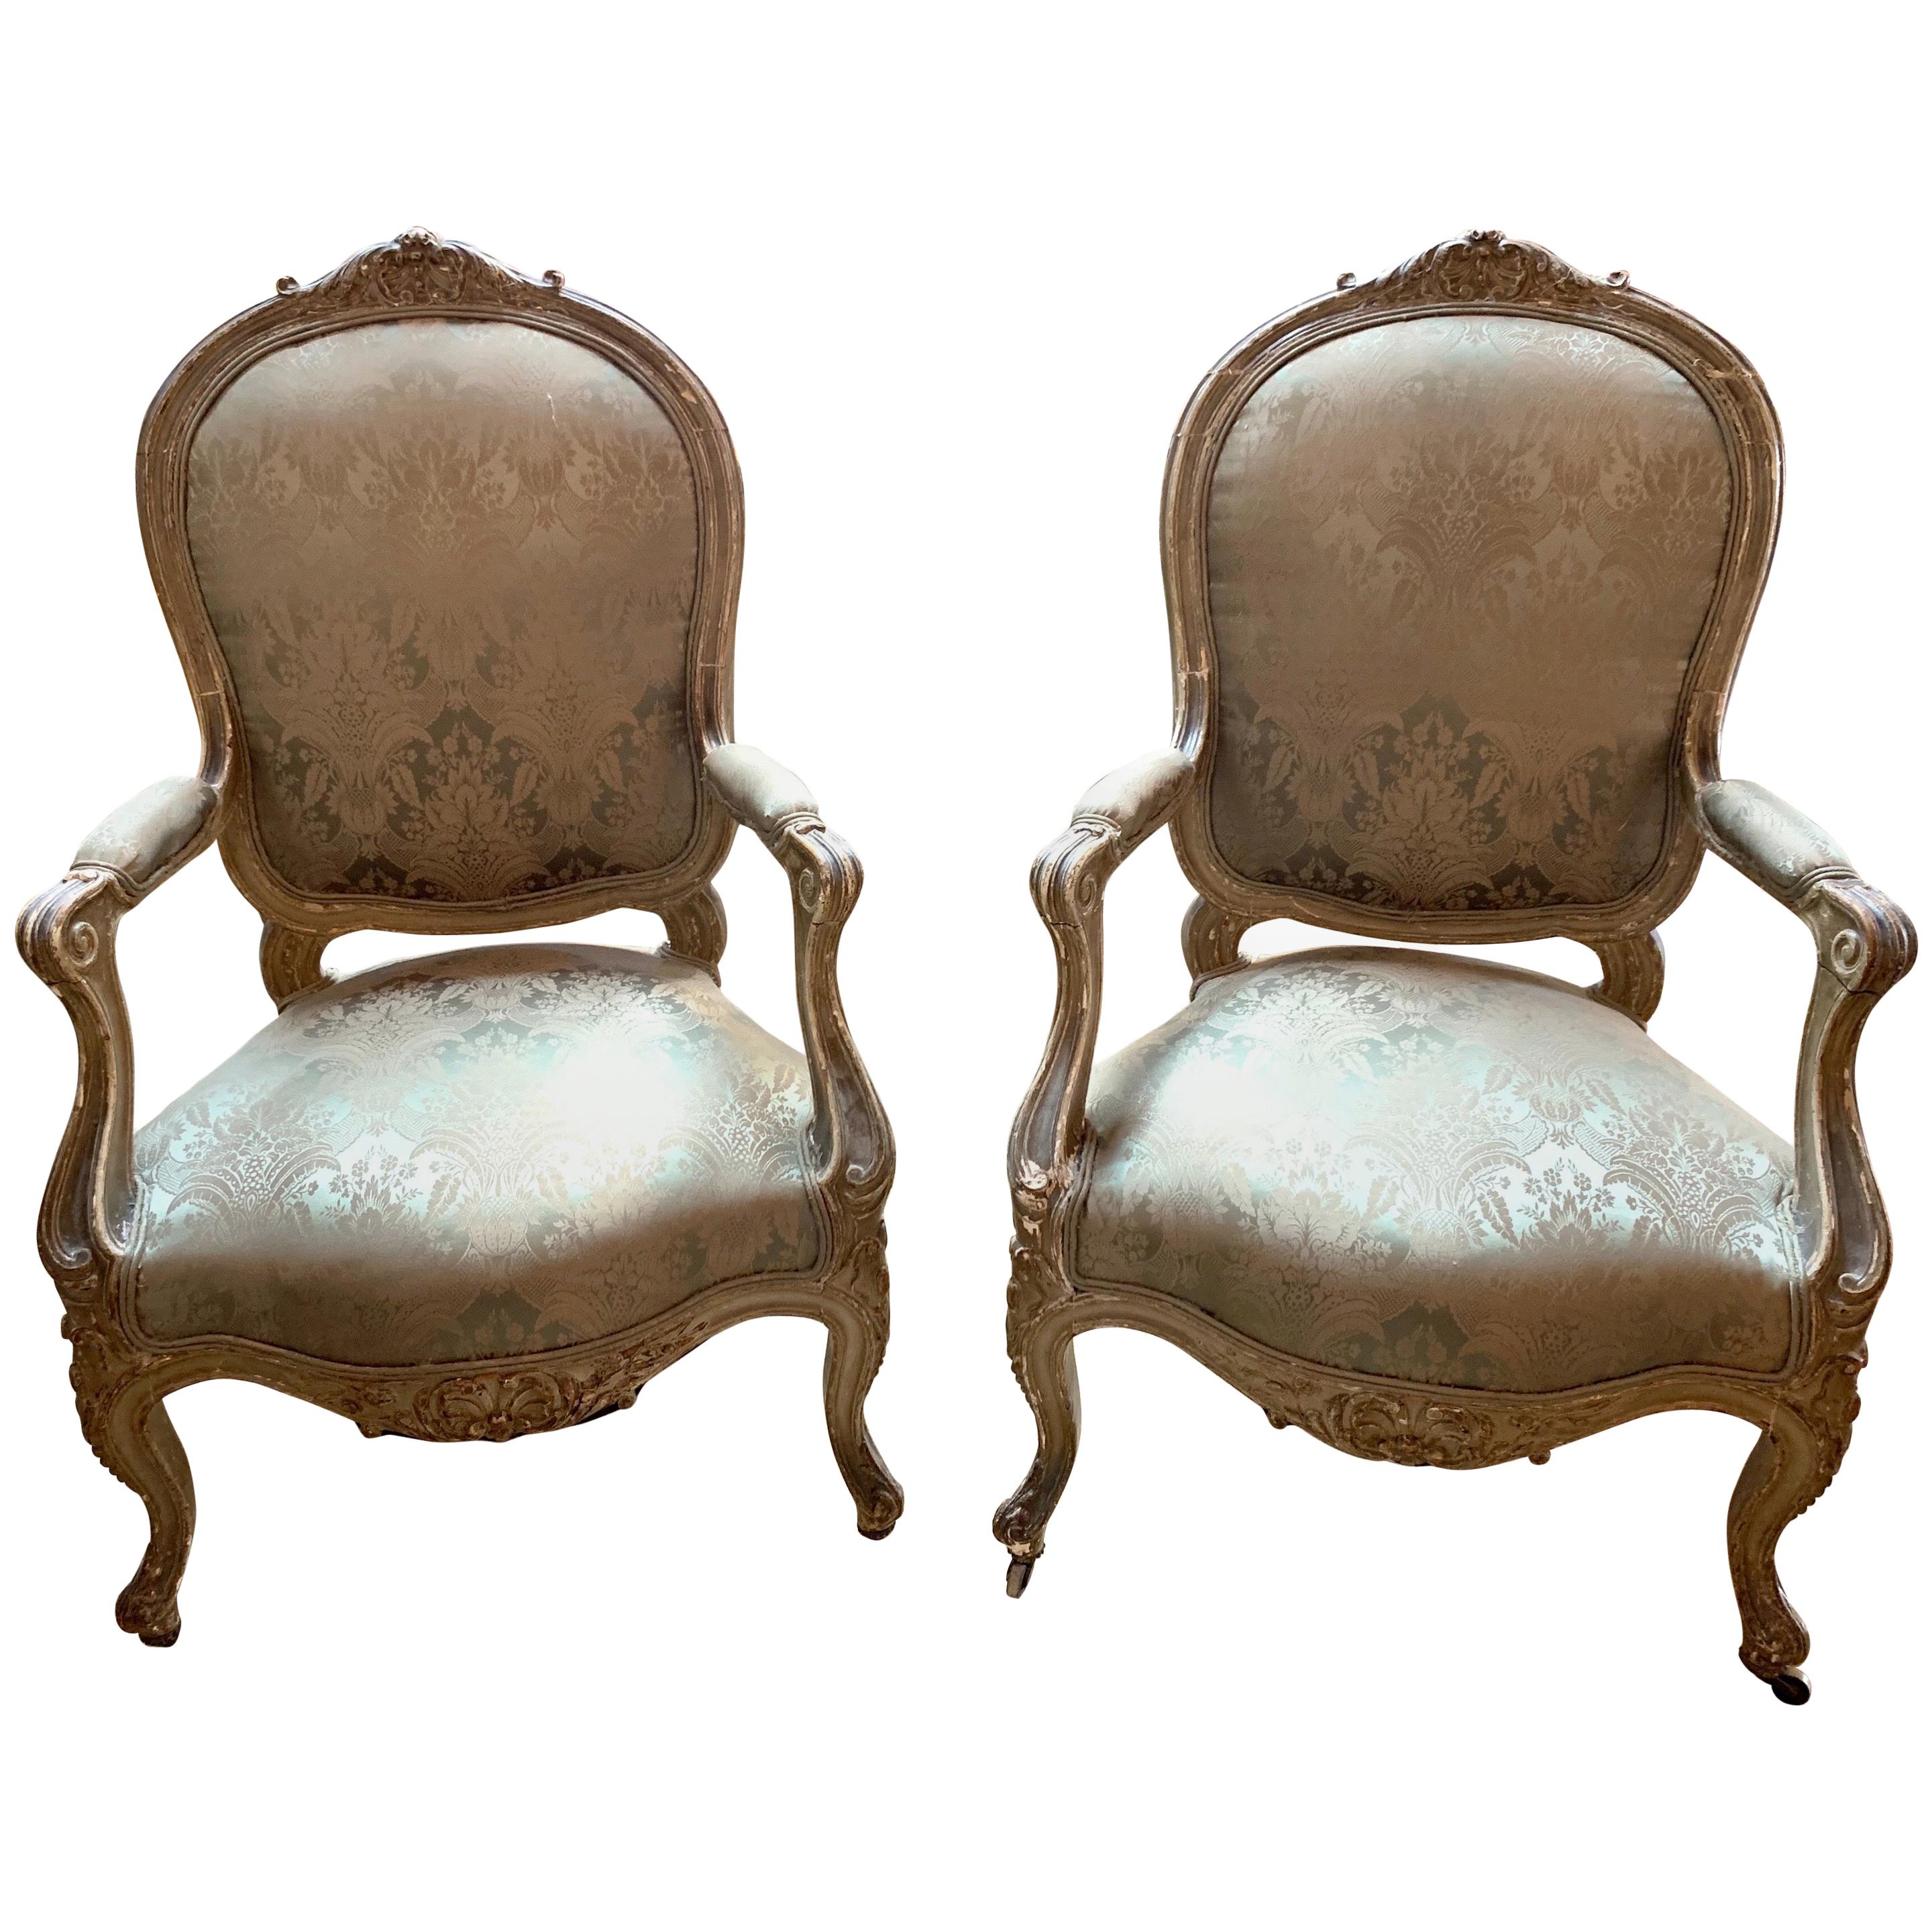 Pair of Early 19th Century Carved and Painted Italian Armchairs